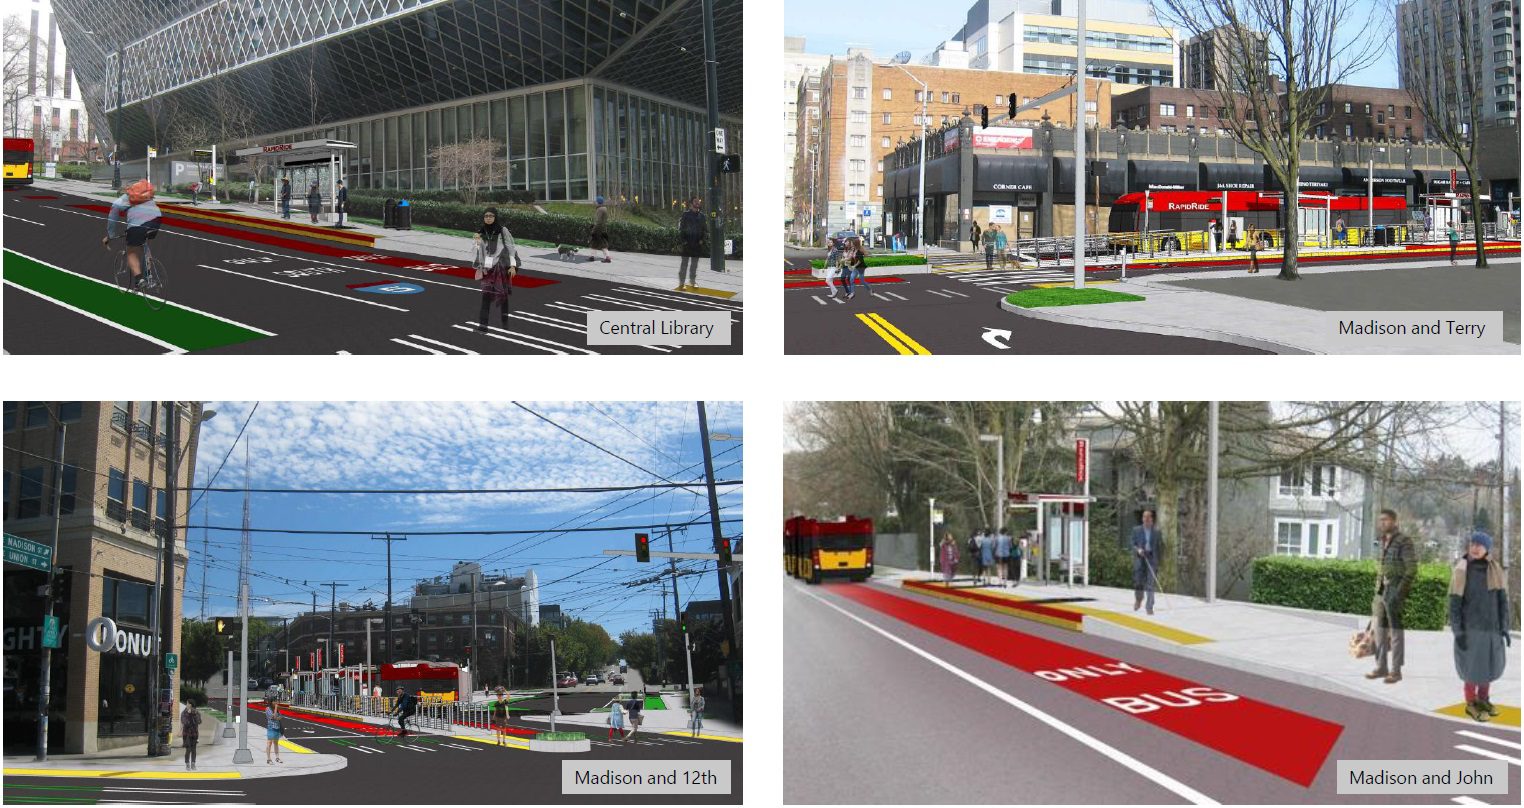 Four conceptual rendering graphics showing a visualization of the new Madison - RapidRide G Line bus rapid transit corridor. The upper left photo shows a cyclist and pedestrian in the foreground with a bus pulling away from a RapidRide stop in the far left. The upper right photo shows a bus loading and unloading passengers, with trees, pedestrians, and buildings available throughout. The lower left photo shows a bus traveling in the corridor on Capitol Hill, with blue skies in the background. The lower right photo shows a bus pulling away and pedestrians walking to their destinations in the middle and right sides.